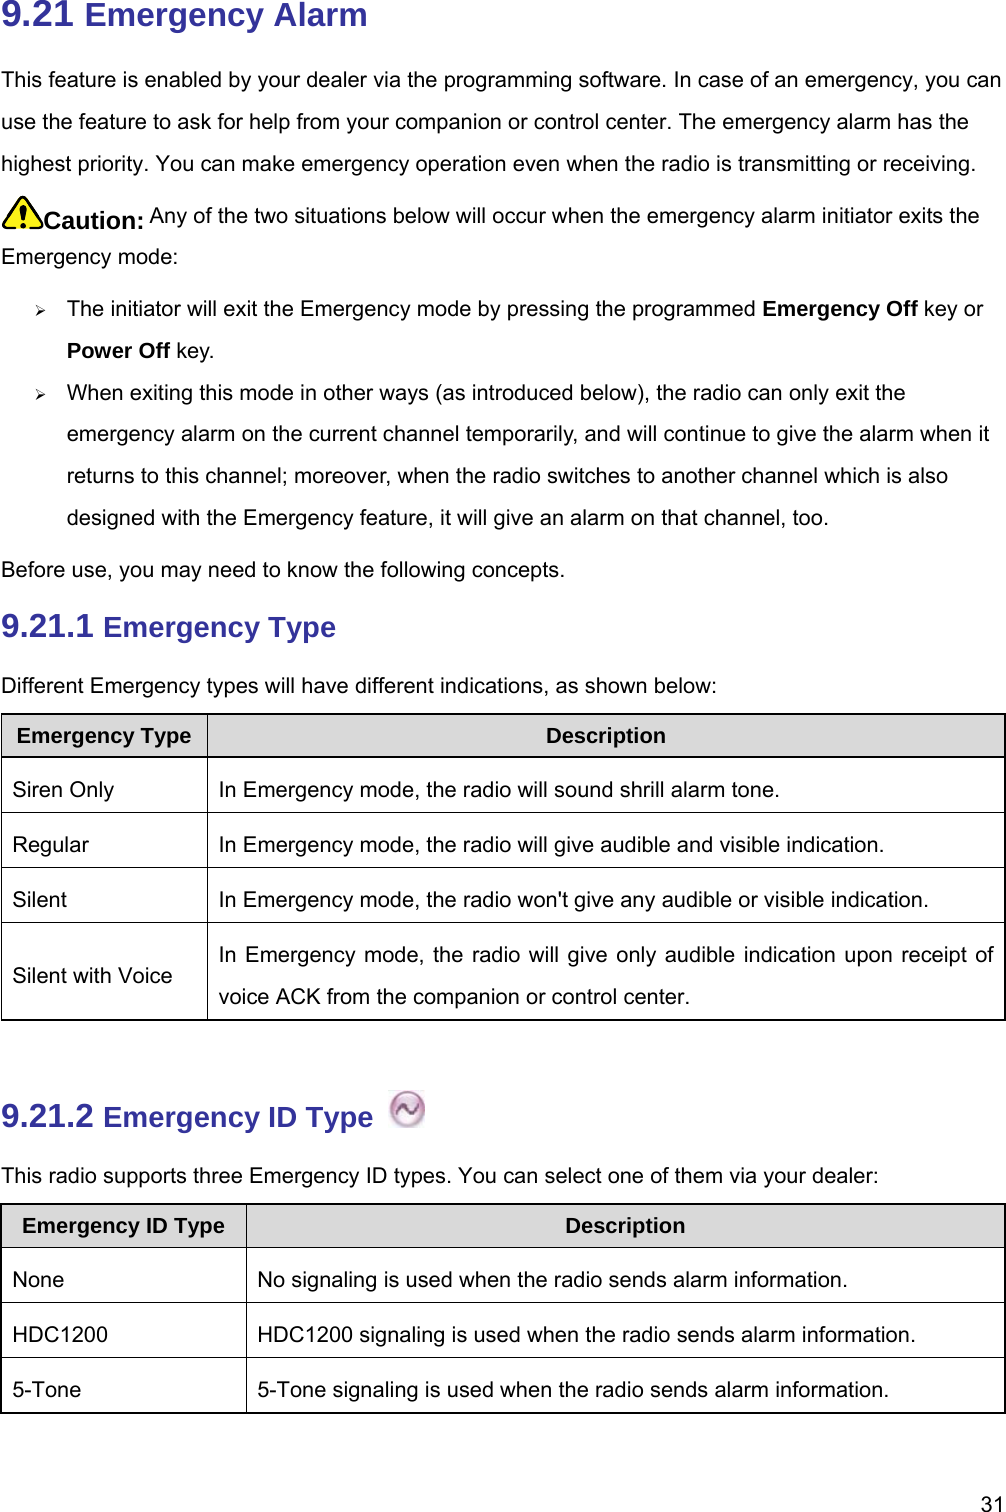   319.21 Emergency Alarm This feature is enabled by your dealer via the programming software. In case of an emergency, you can use the feature to ask for help from your companion or control center. The emergency alarm has the highest priority. You can make emergency operation even when the radio is transmitting or receiving.   Caution: Any of the two situations below will occur when the emergency alarm initiator exits the Emergency mode:   ¾ The initiator will exit the Emergency mode by pressing the programmed Emergency Off key or Power Off key.   ¾ When exiting this mode in other ways (as introduced below), the radio can only exit the emergency alarm on the current channel temporarily, and will continue to give the alarm when it returns to this channel; moreover, when the radio switches to another channel which is also designed with the Emergency feature, it will give an alarm on that channel, too.   Before use, you may need to know the following concepts.   9.21.1 Emergency Type Different Emergency types will have different indications, as shown below:   Emergency Type  Description Siren Only  In Emergency mode, the radio will sound shrill alarm tone.   Regular  In Emergency mode, the radio will give audible and visible indication.   Silent  In Emergency mode, the radio won&apos;t give any audible or visible indication.   Silent with Voice In Emergency mode, the radio will give only audible indication upon receipt of voice ACK from the companion or control center.    9.21.2 Emergency ID Type   This radio supports three Emergency ID types. You can select one of them via your dealer:   Emergency ID Type  Description None  No signaling is used when the radio sends alarm information. HDC1200  HDC1200 signaling is used when the radio sends alarm information. 5-Tone  5-Tone signaling is used when the radio sends alarm information.  